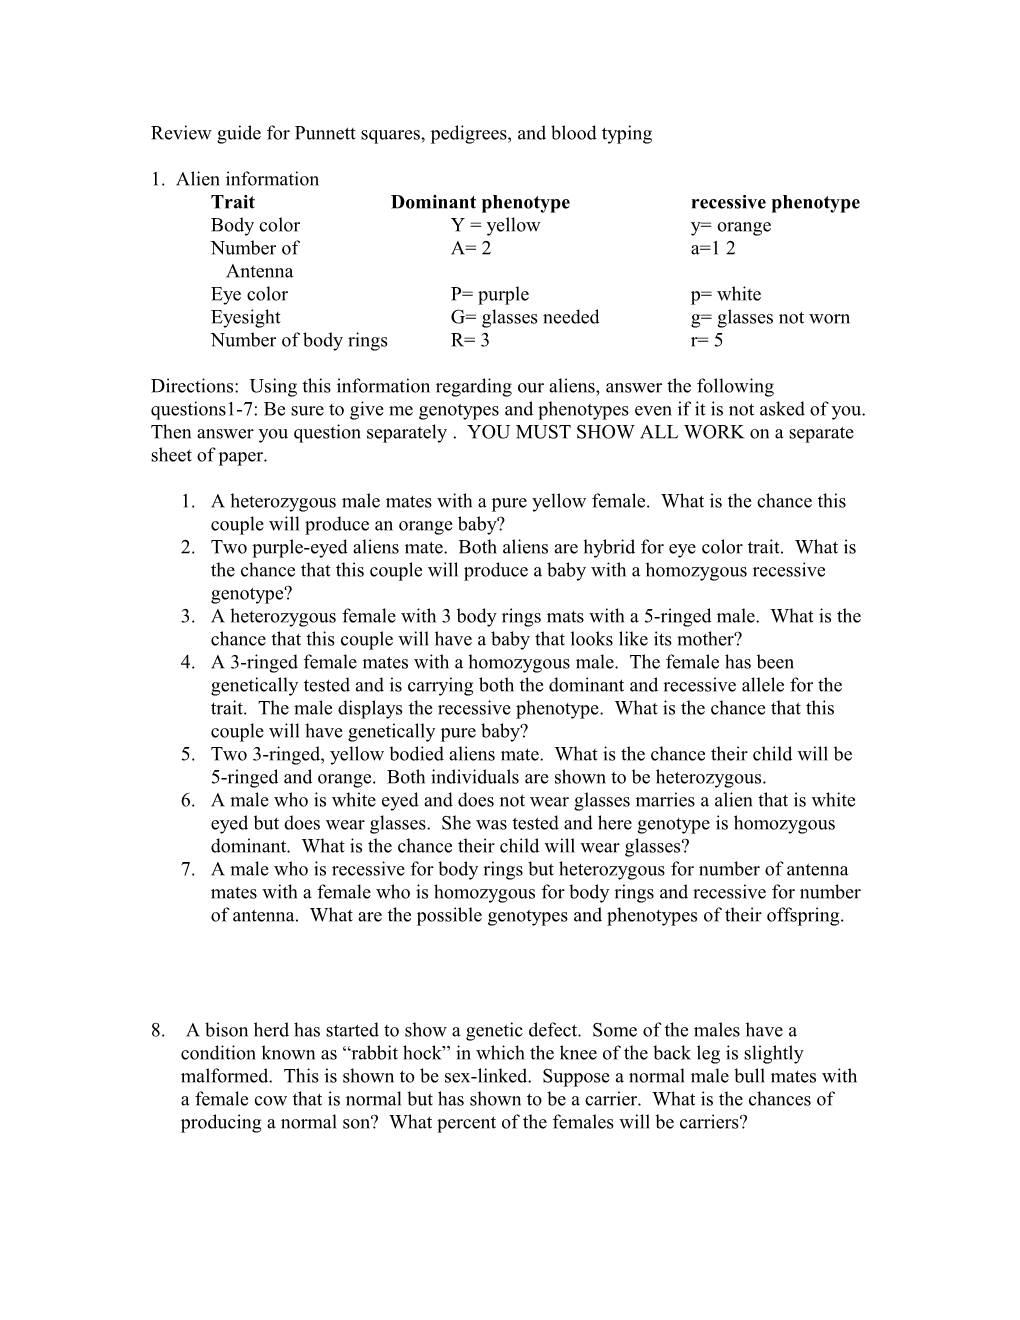 Review Guide for Punnett Squares, Pedigrees, and Blood Typing